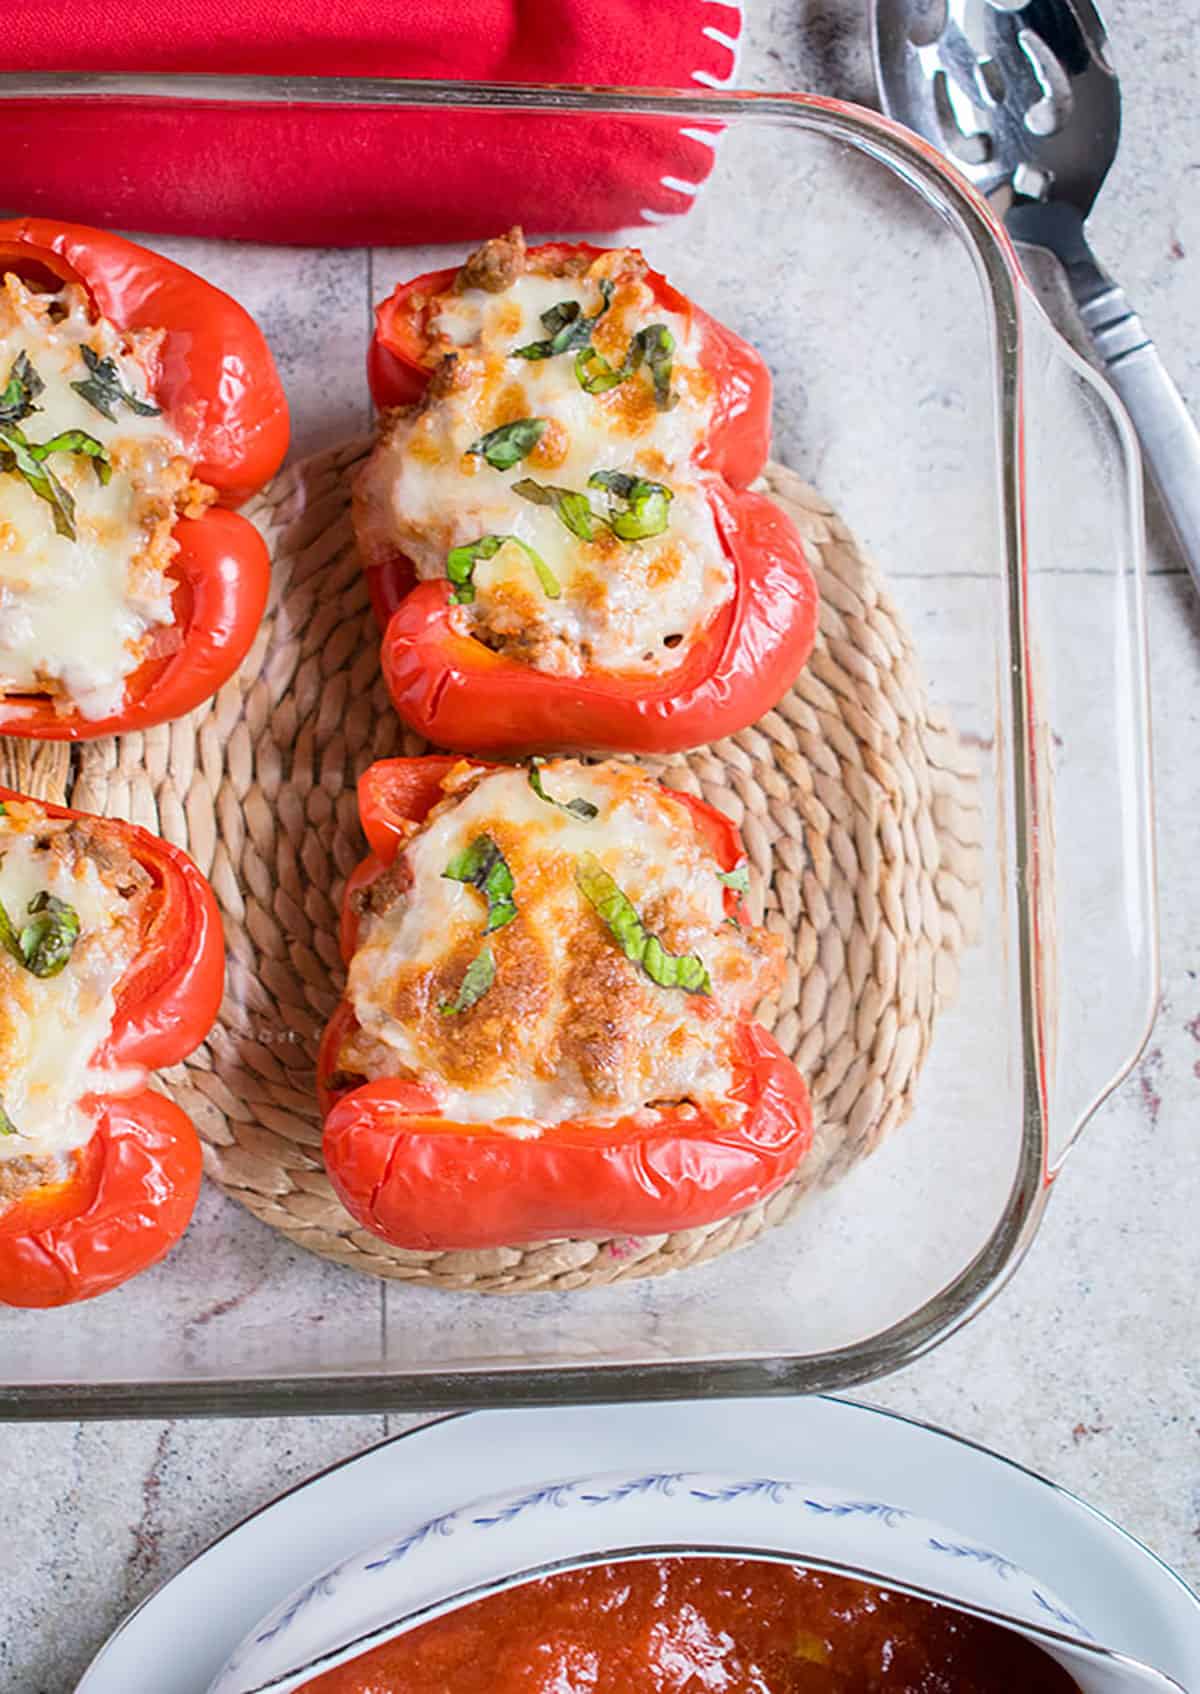 baked stuffed peppers with tomato sauce on side